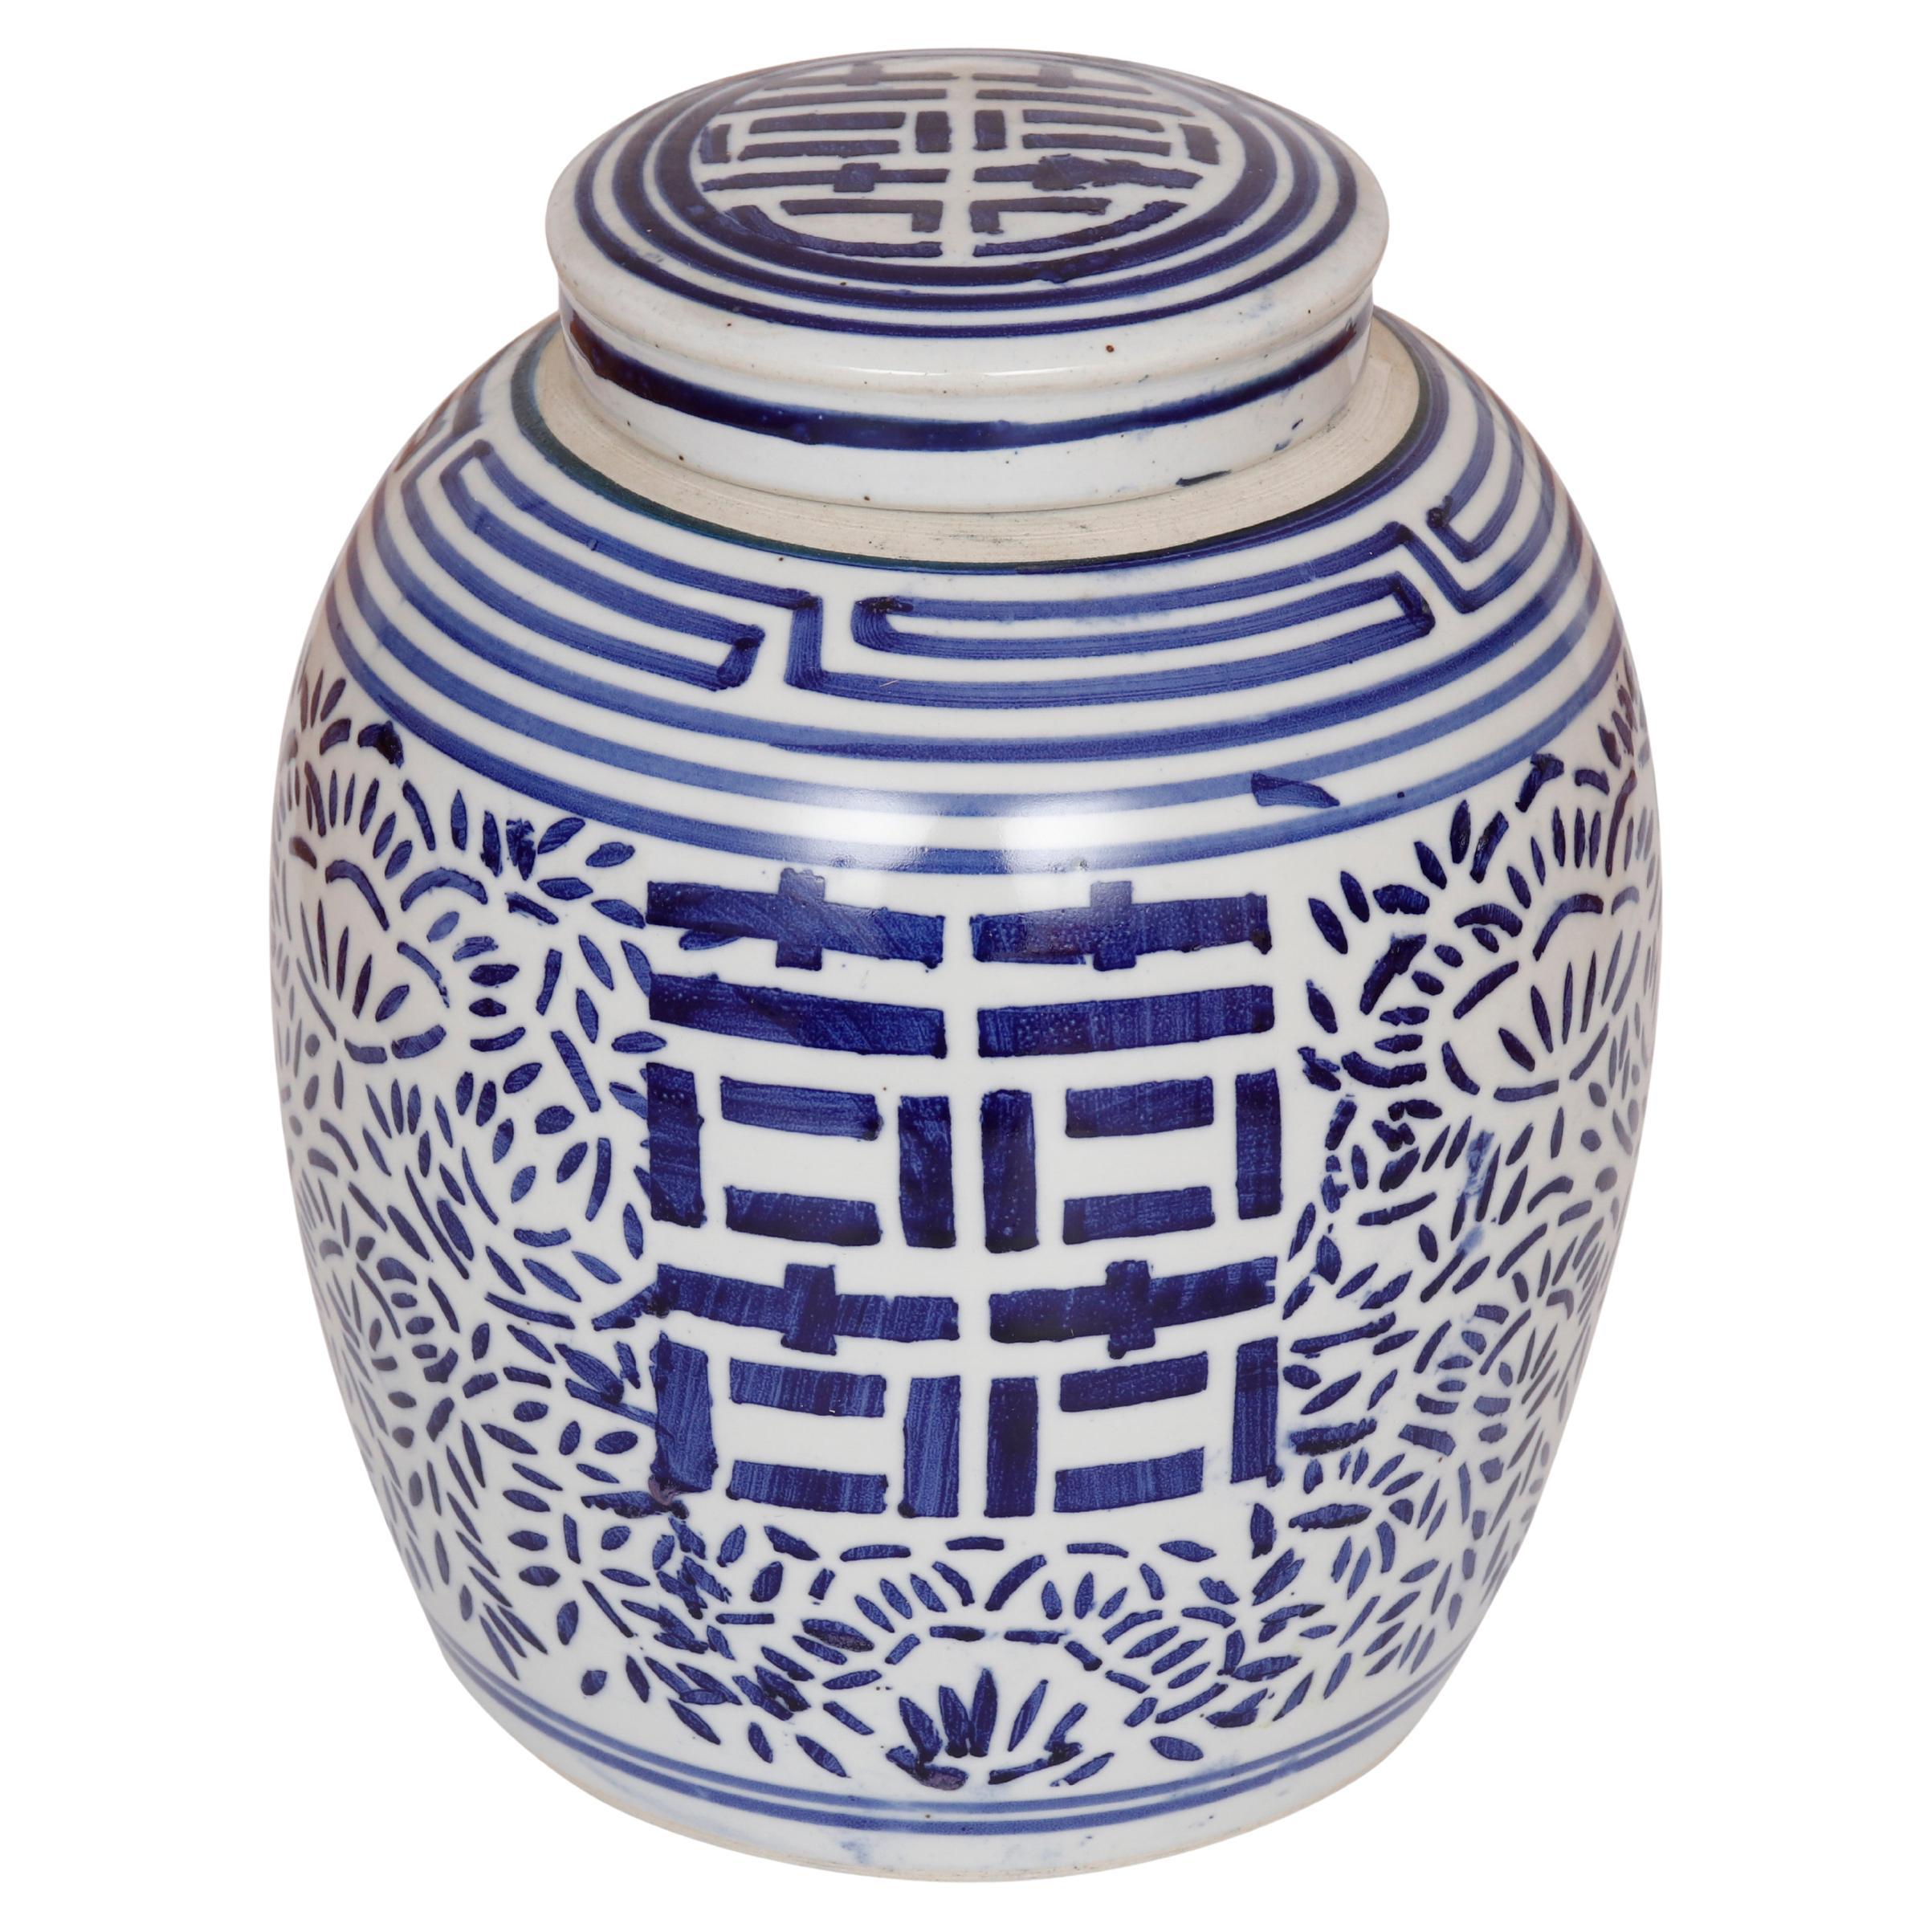 Double Happiness Blue & White Ceramic Ginger Jar